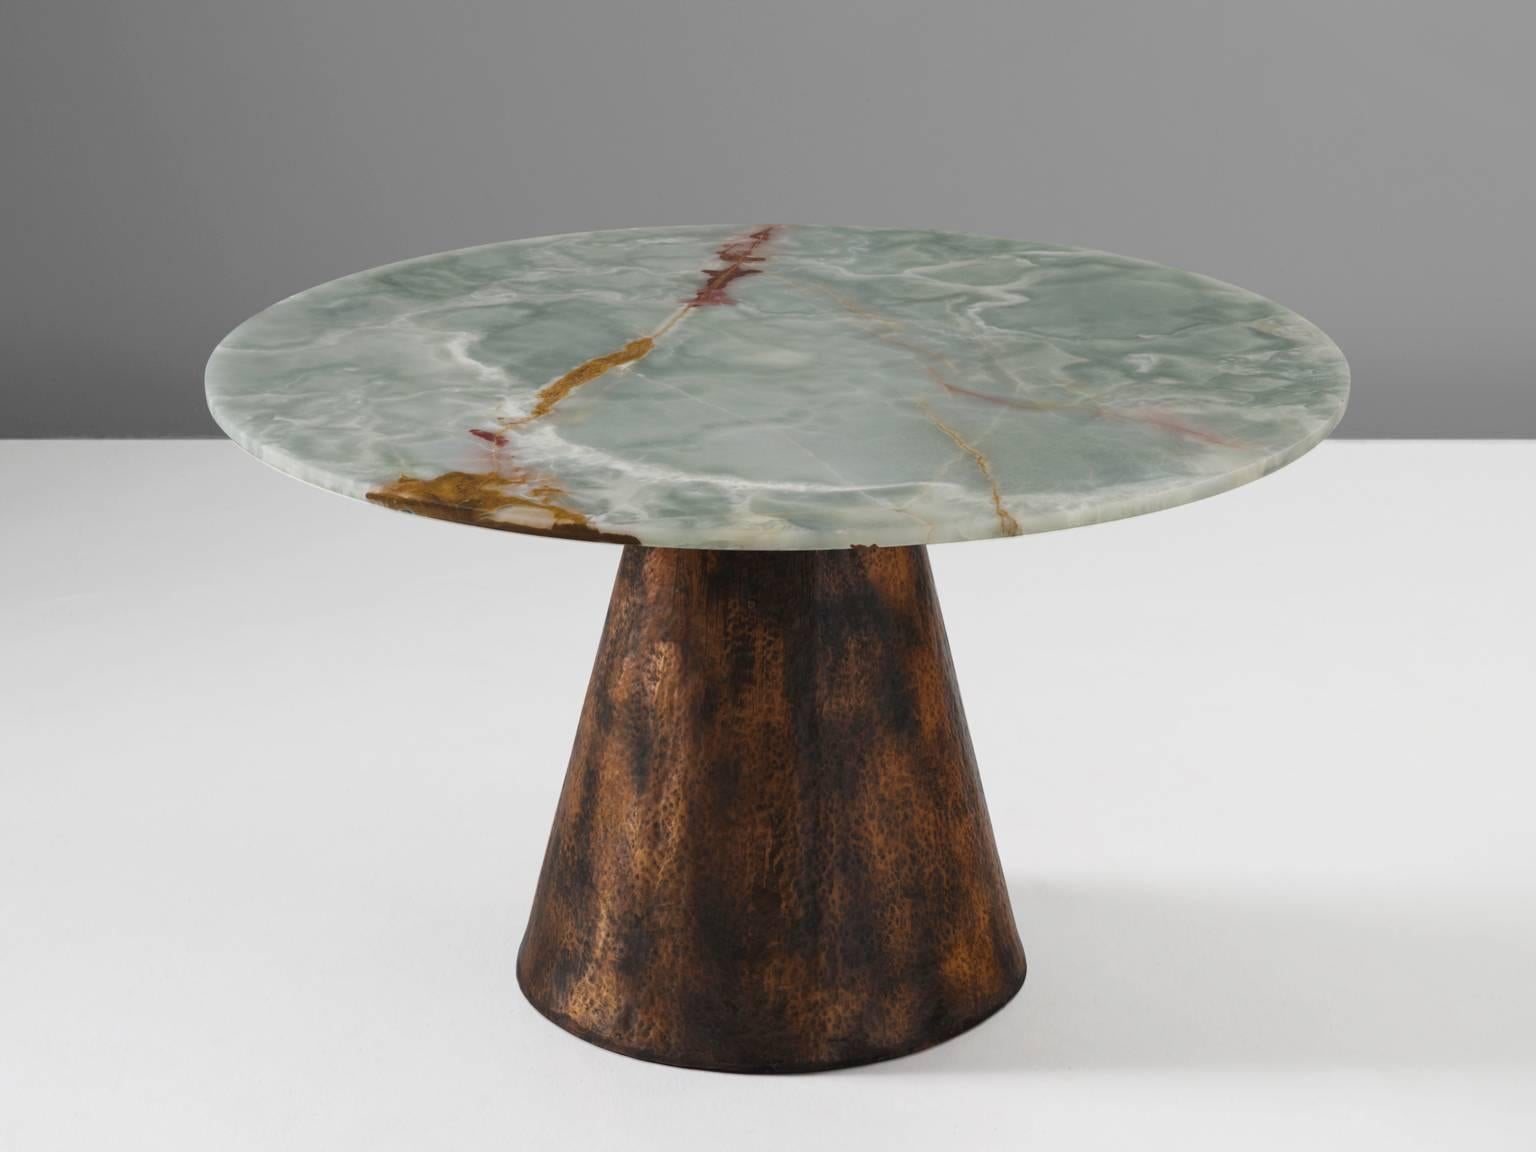 Dining table, onyx and copper base, Italy, 1970s.

This table is in the style of Angelo Mangiarotti (1921–2012). His designs are solid and strong and he always used materials that will stand the test of time. The most striking feature of this table